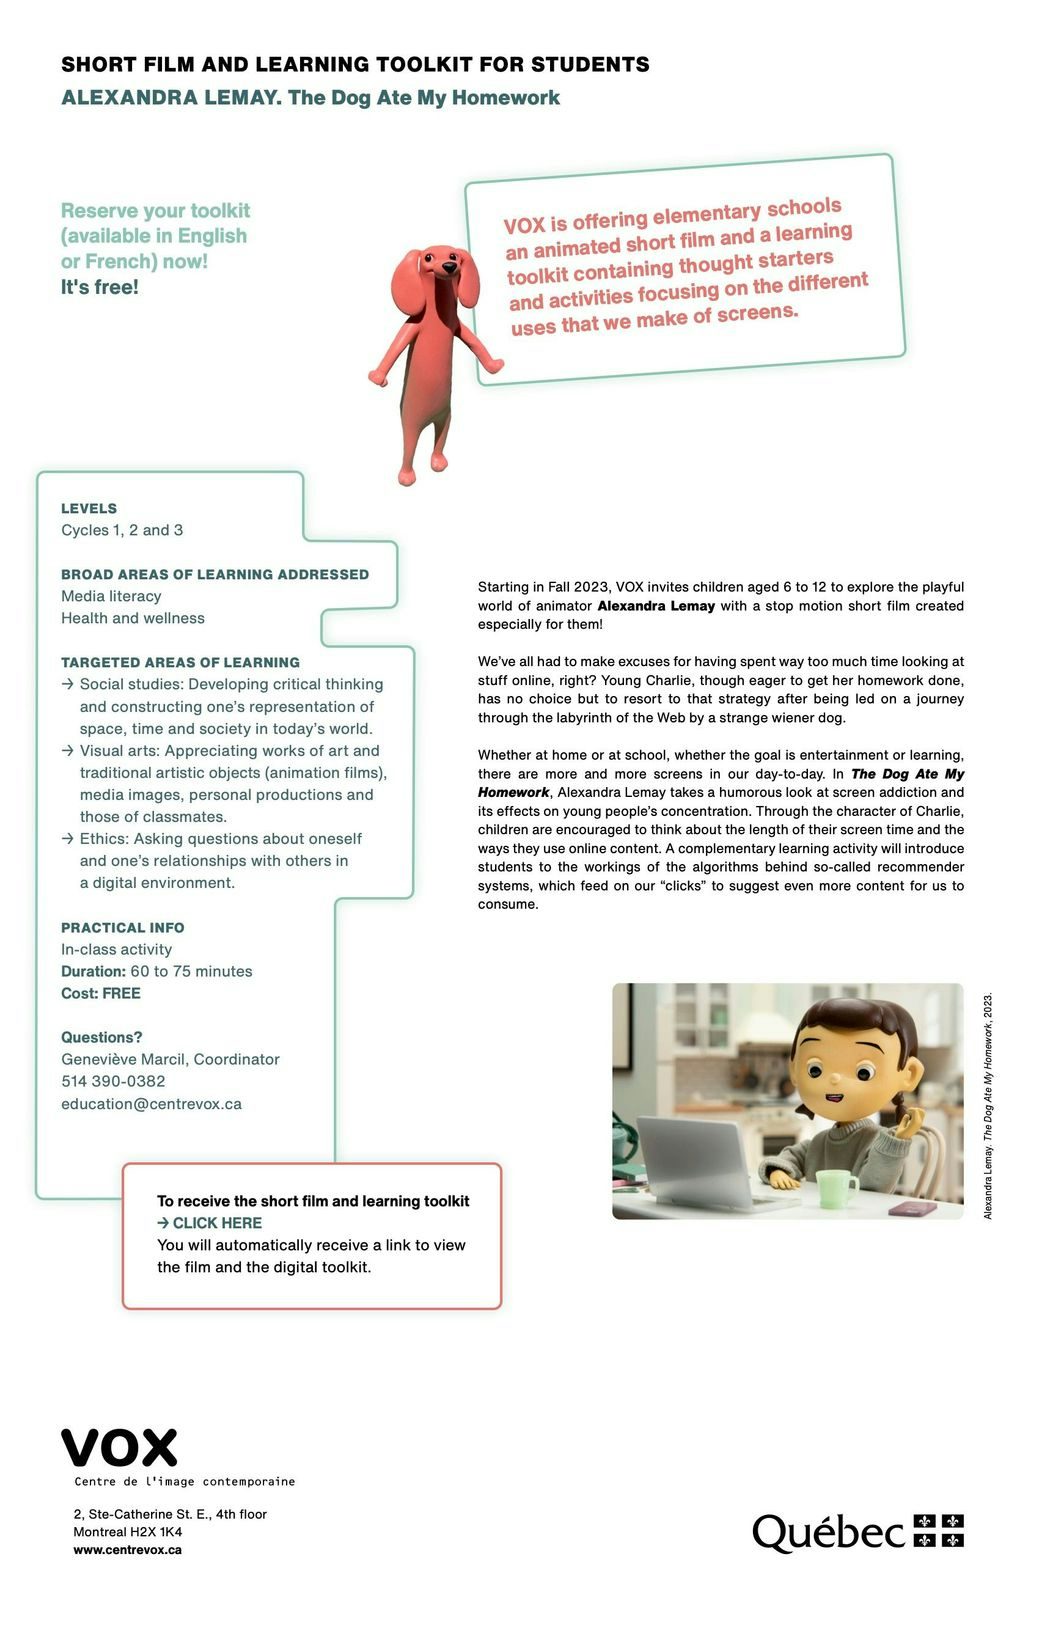 Sollicitation document for the learning toolkit on children and screens